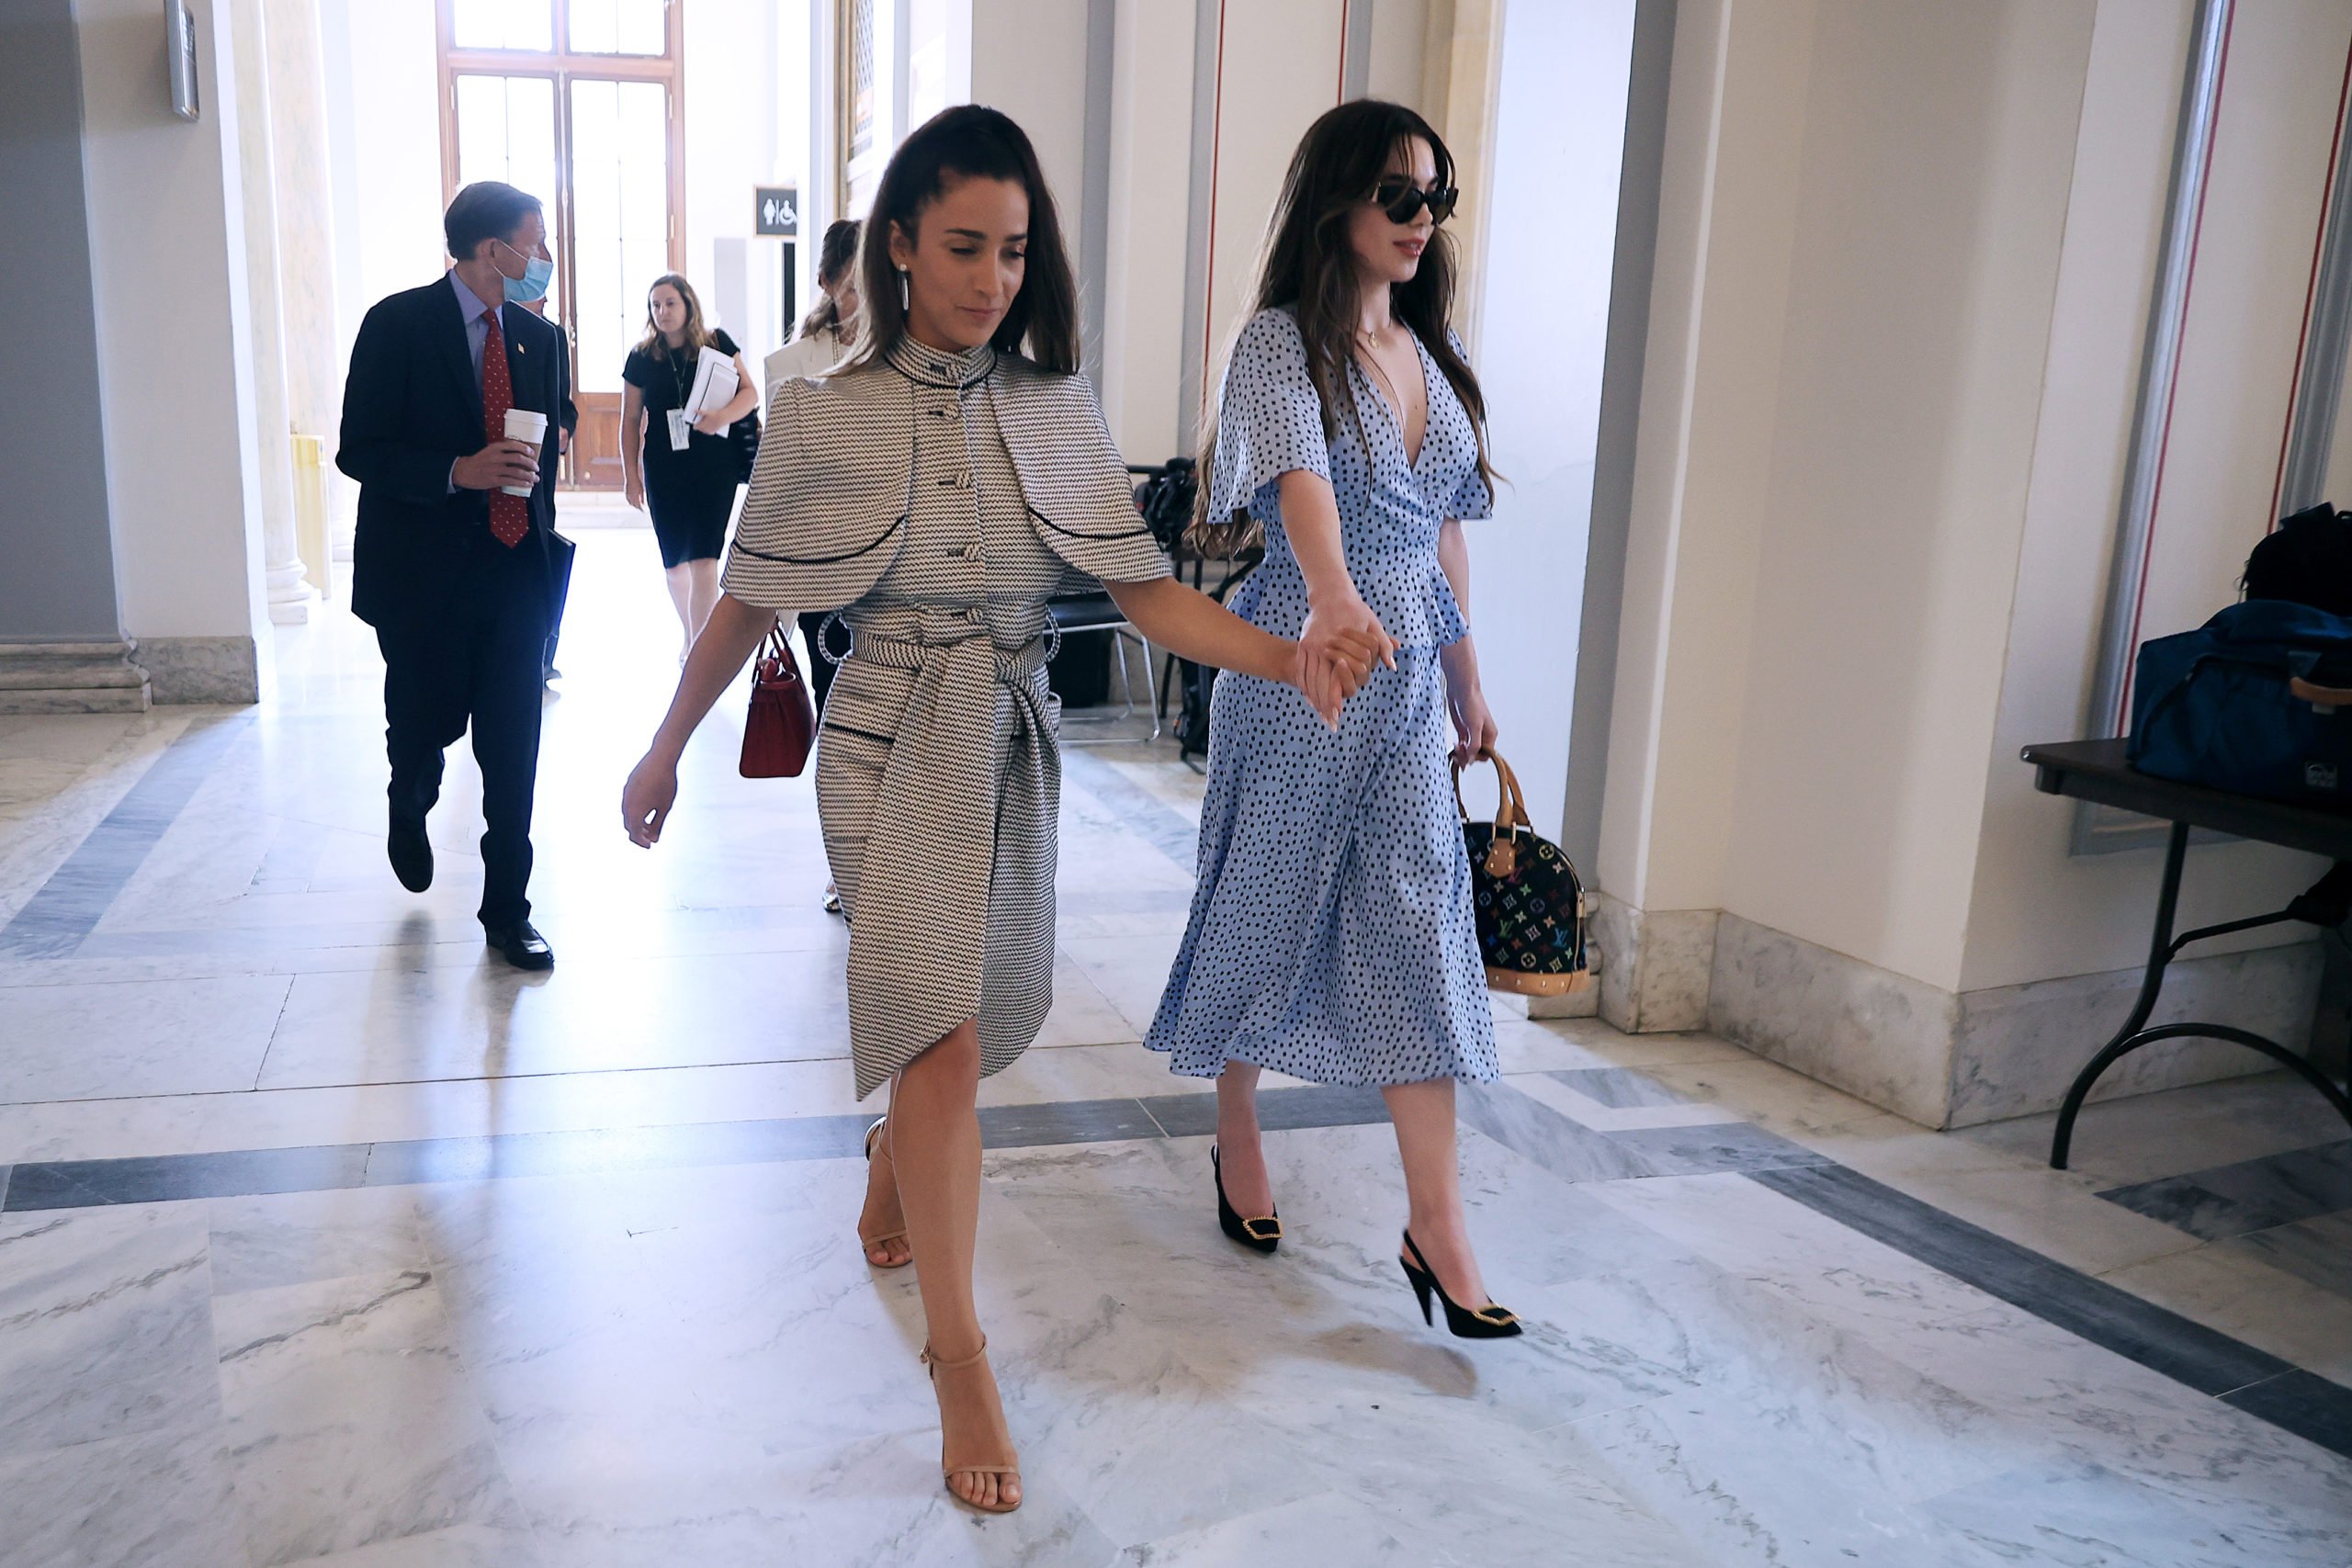 WASHINGTON, DC - SEPTEMBER 15: Former U.S. Olympic gymnasts Aly Raisman (L) and McKayla Maroney arrive for a news conference in the Russell Senate Office Building after testifying before the Senate Judiciary Committee on September 15, 2021 in Washington, DC. Raisman, Maroney and other champion gymnasts testified about the abuse they experienced at the hands of Larry Nassar, the now-imprisoned U.S. women's national gymnastics team doctor, and the Federal Bureau of Investigatoin’s lack of urgency when handling their cases. Chip Somodevilla/Getty Images